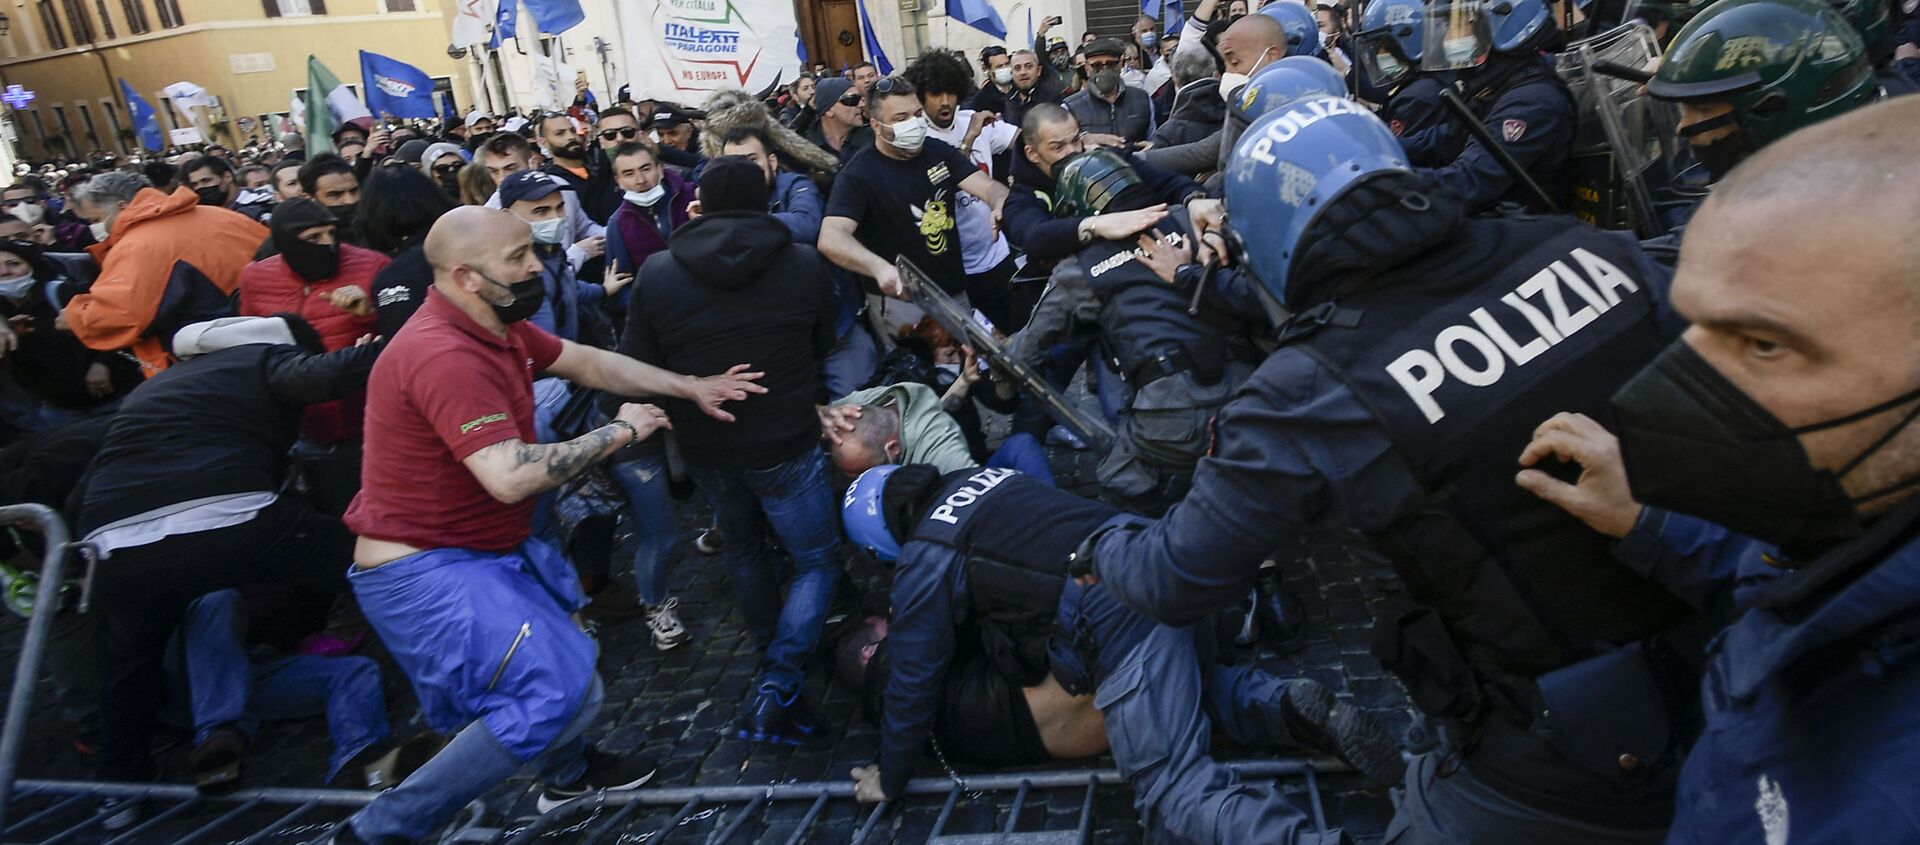 Protesters (L) skirmish with anti-riot policemen as they take part in a demonstration of restaurant owners, entrepreneurs and small businesses owners on April 6, 2021 outside parliament on Piazza Montecitorio in Rome, to protest against closures and against Italy's Health minister, during the Covid-19 coronavirus pandemic. - Sputnik International, 1920, 25.07.2021